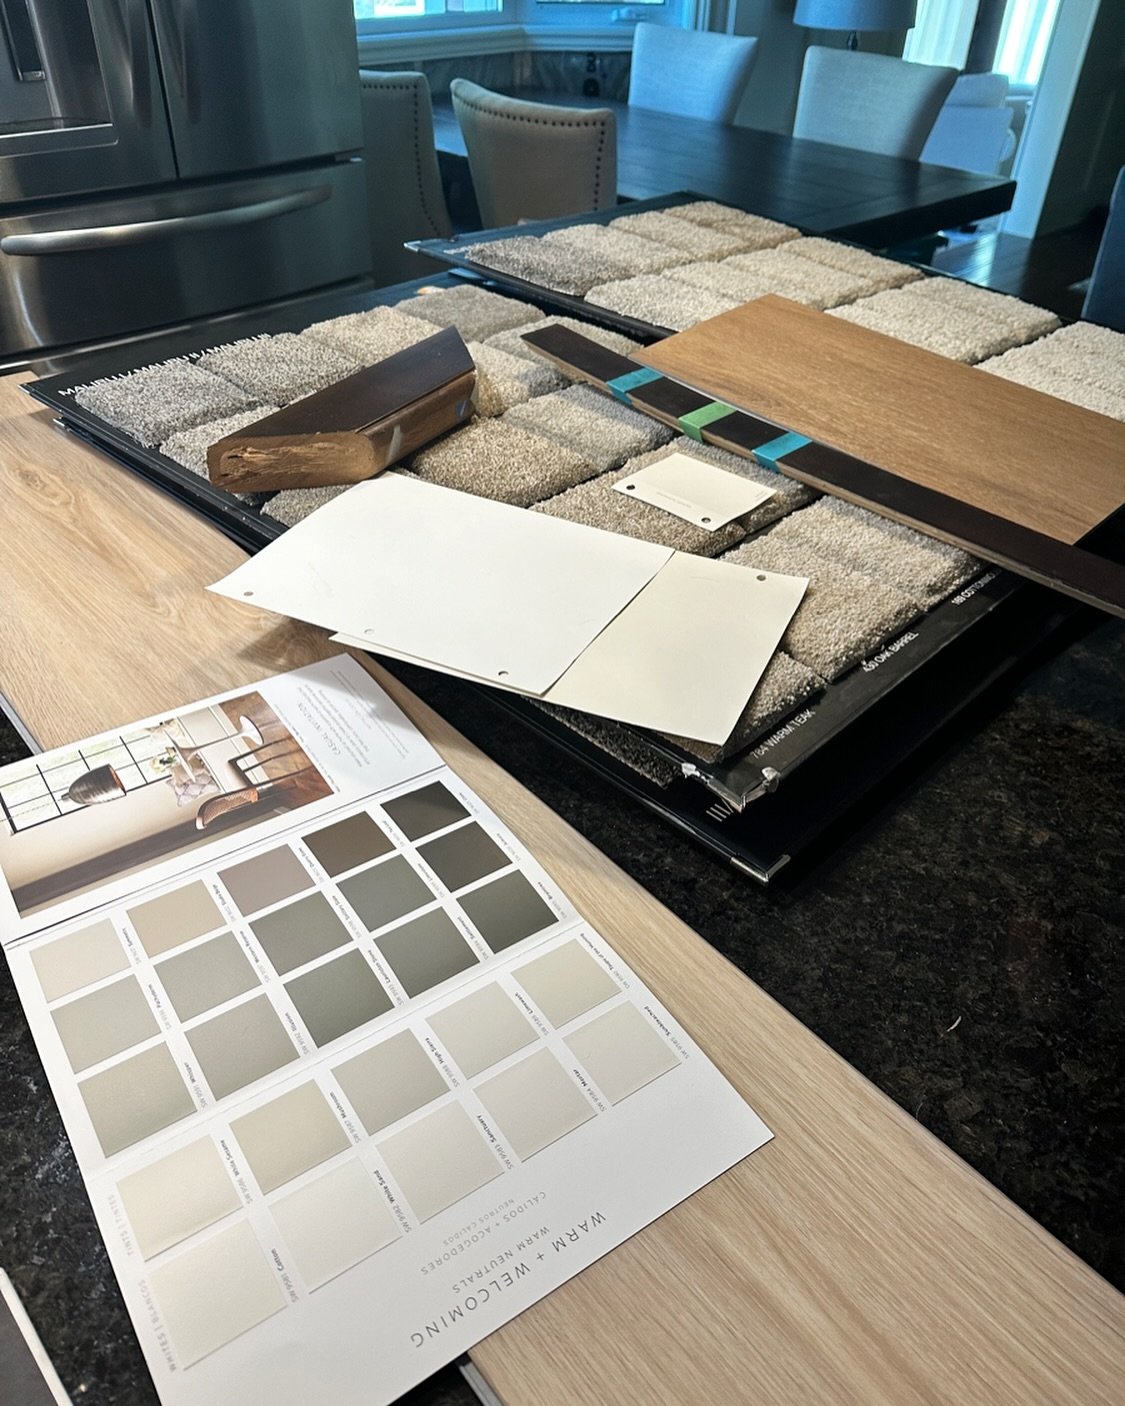 A fun and productive morning of talking through renovation and updates in a beautiful home in Silver Springs!

Going from darker and traditional to light and bright.

Looked at stains, carpet, hardwood and selected beautiful colors that will complime